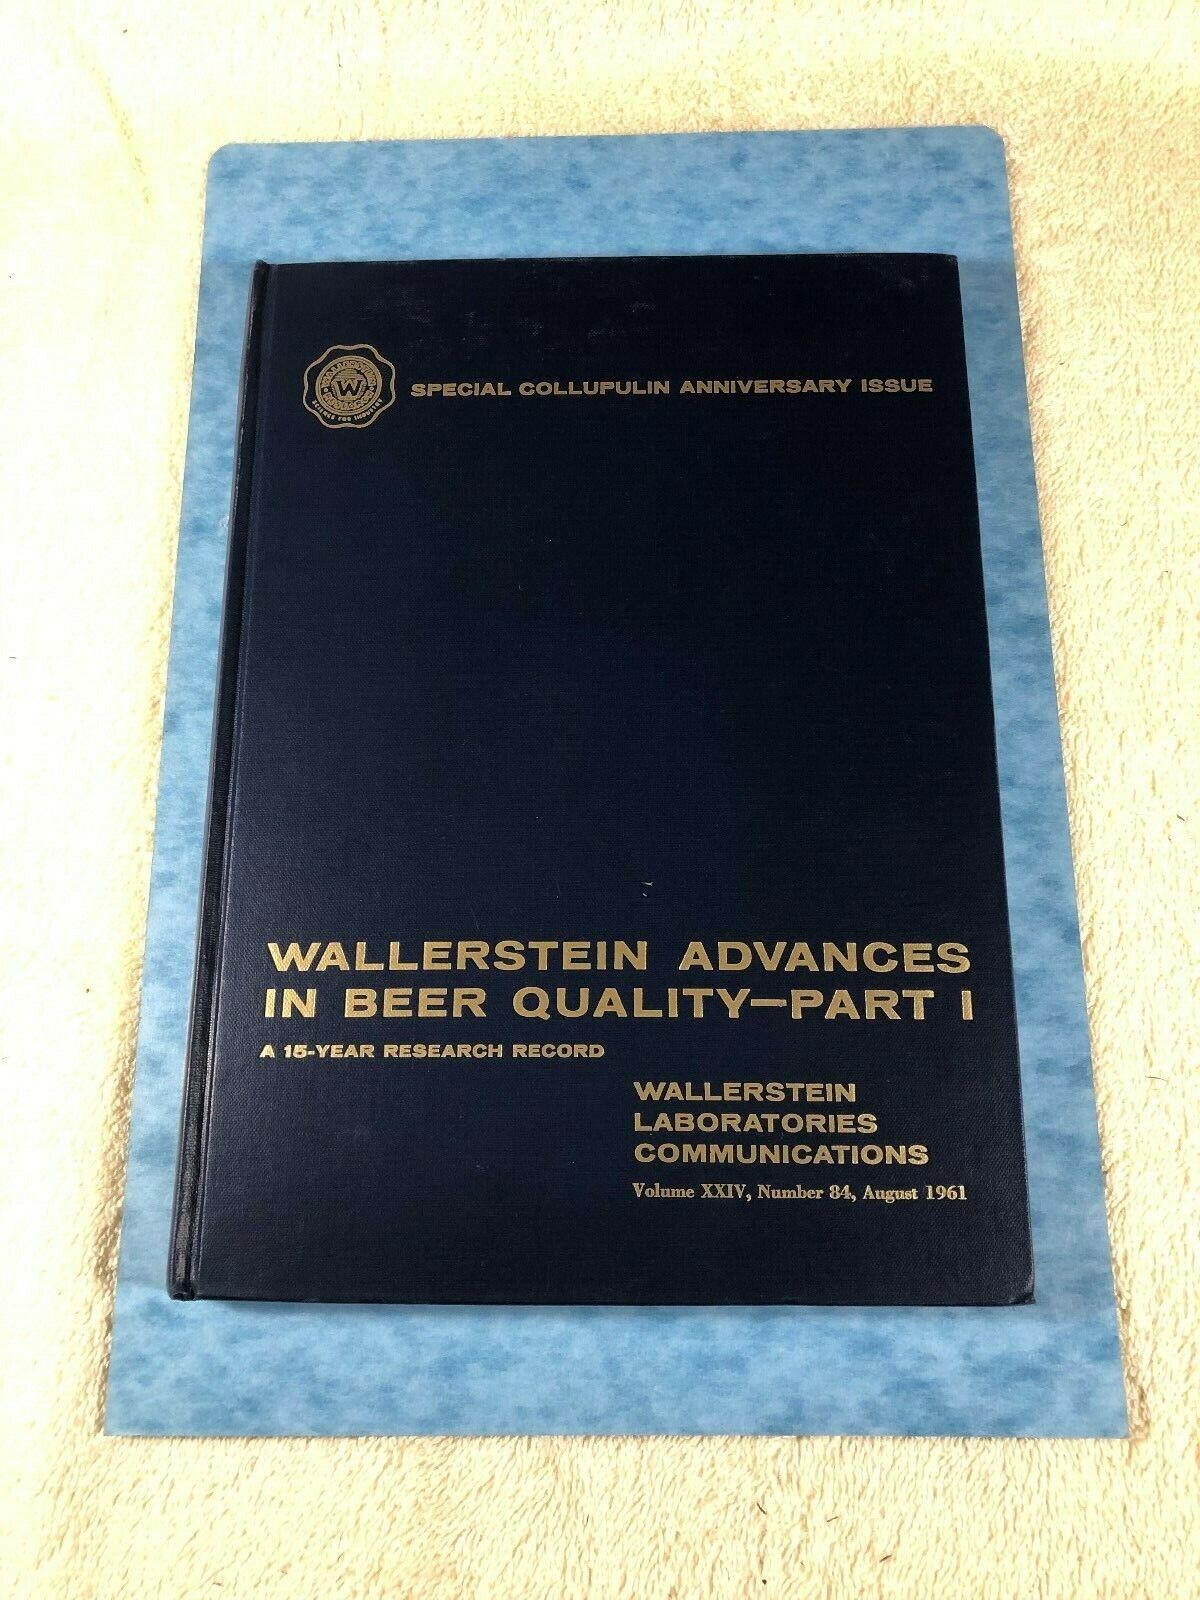 WALLERSTEIN ADVANCES in BEER QUALITY 15 YR RESEARCH BREWING TECHNOLOGY 1961